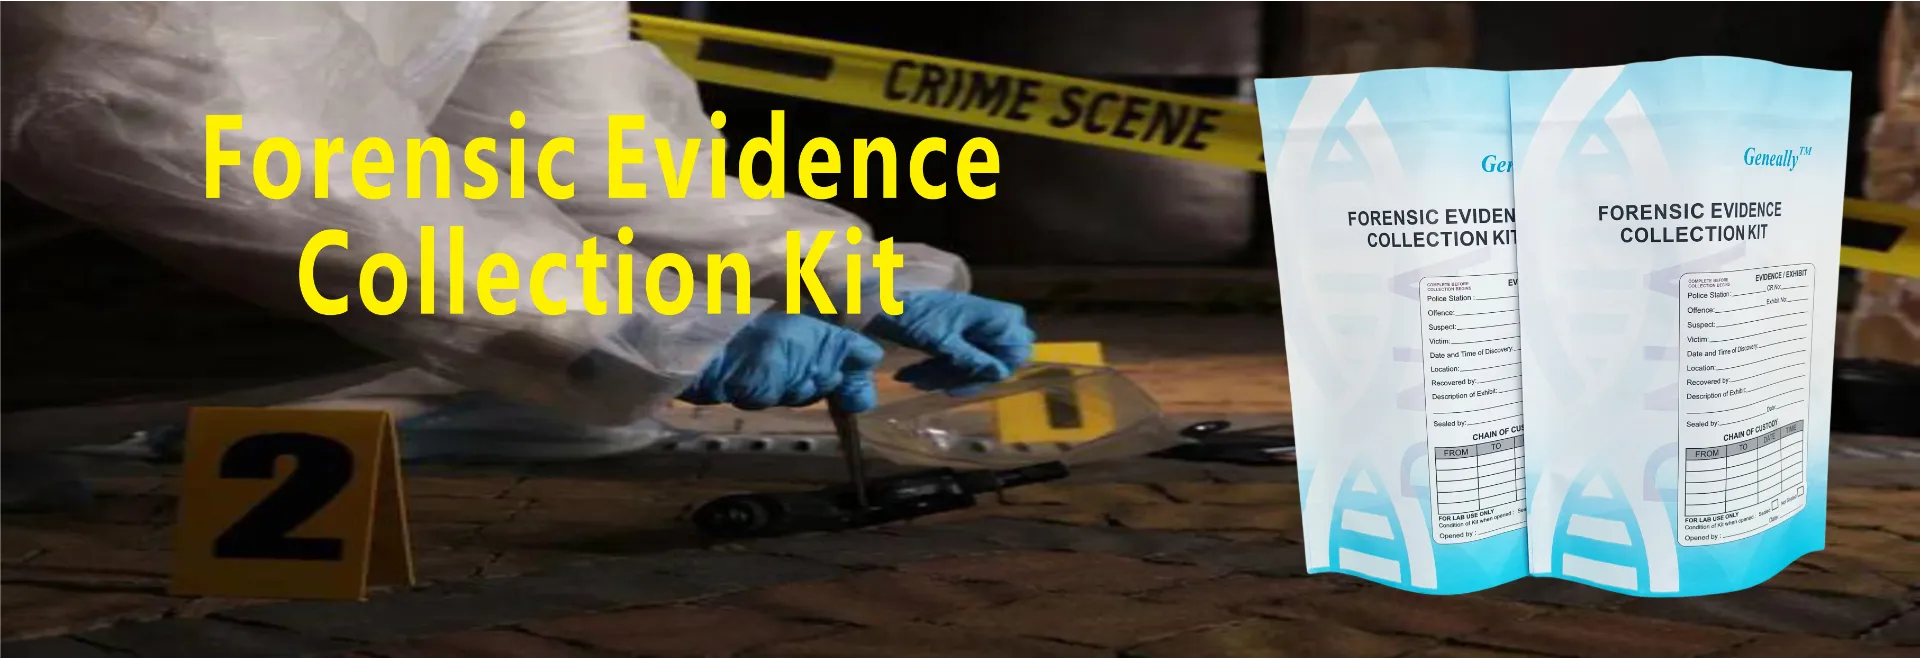 Forensic Evidence Collection Kit